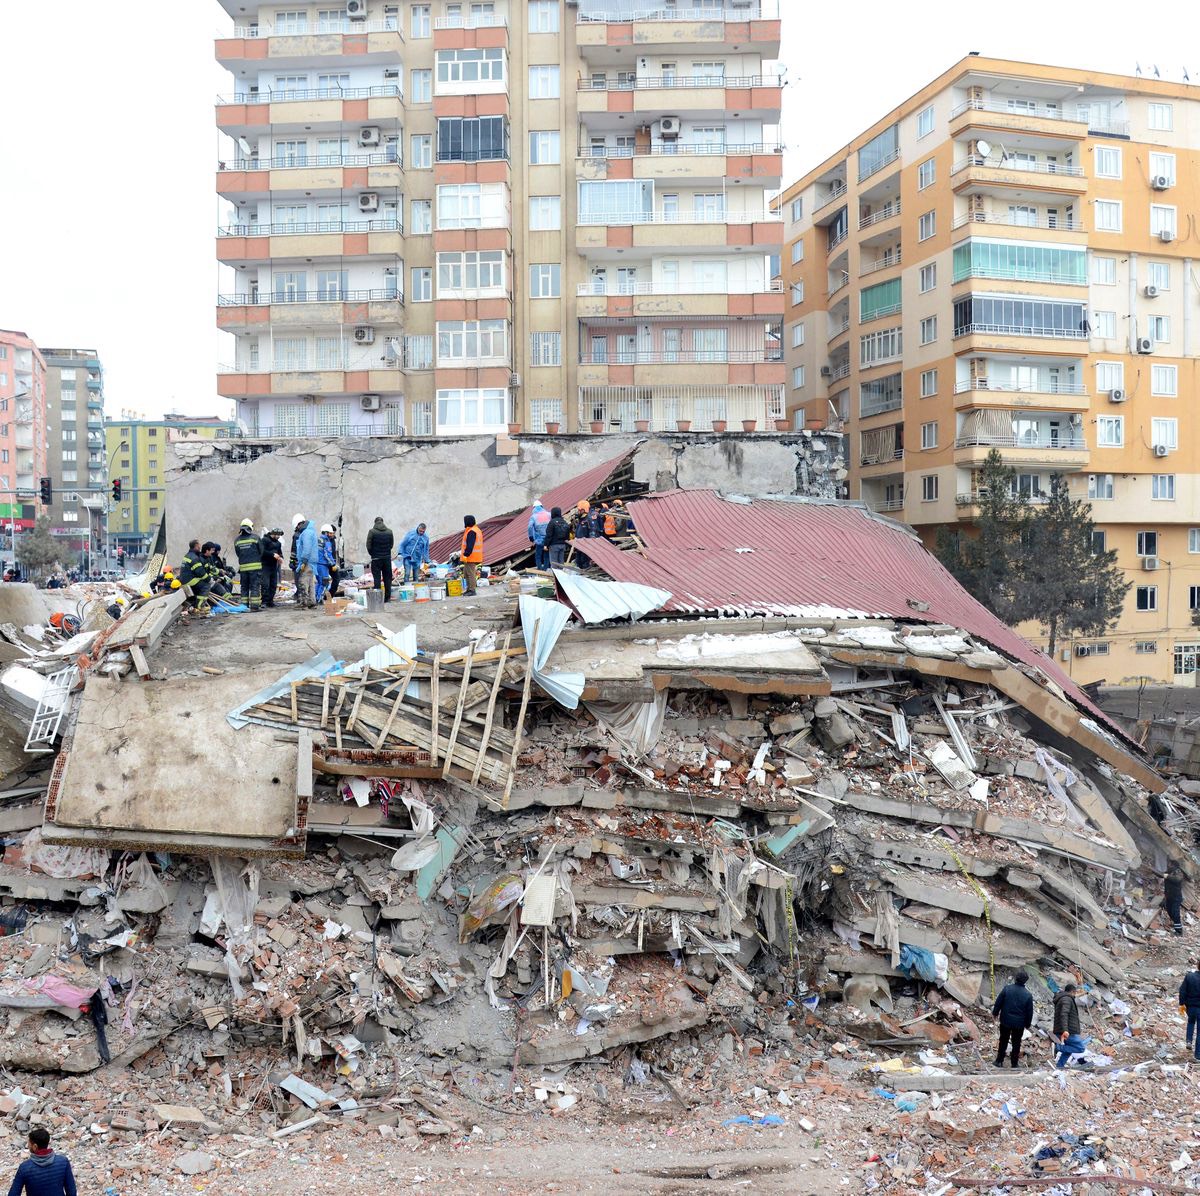 Photographer mert alas calls for help for earthquake victims in turkey and Syria